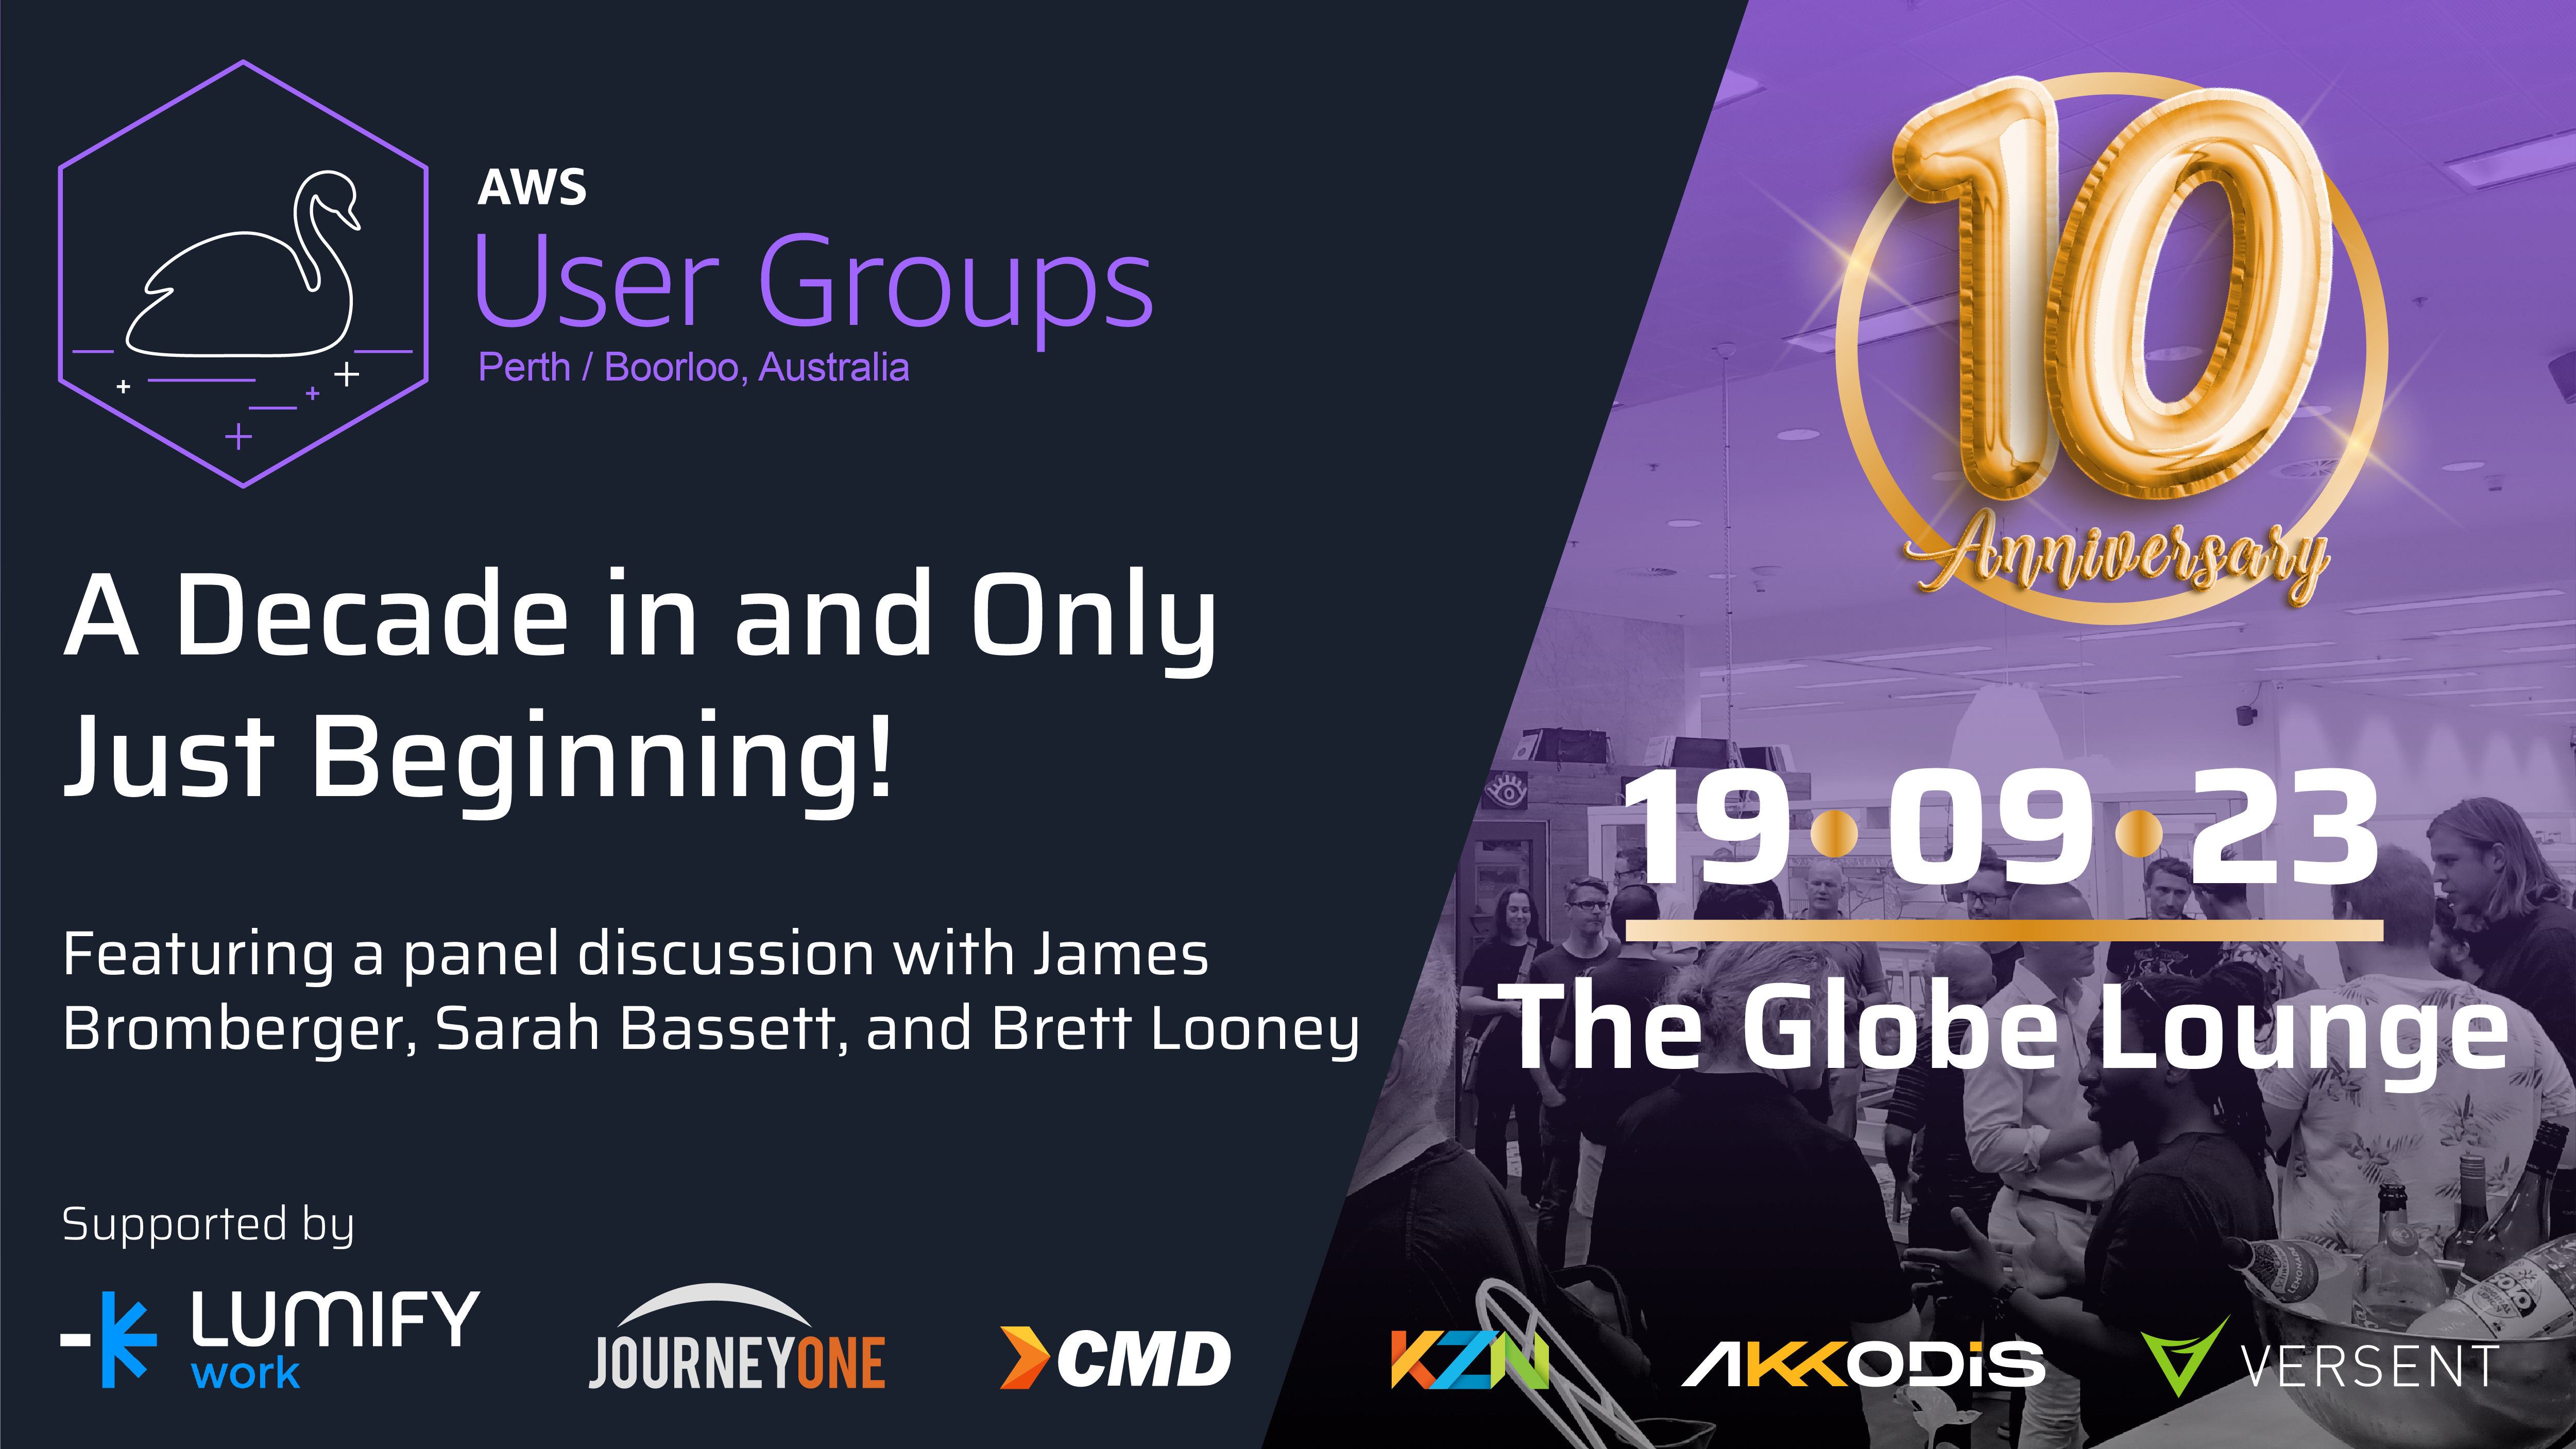 Cover Image for Perth AWS User Group 10-Year Celebration (Panel & Networking)